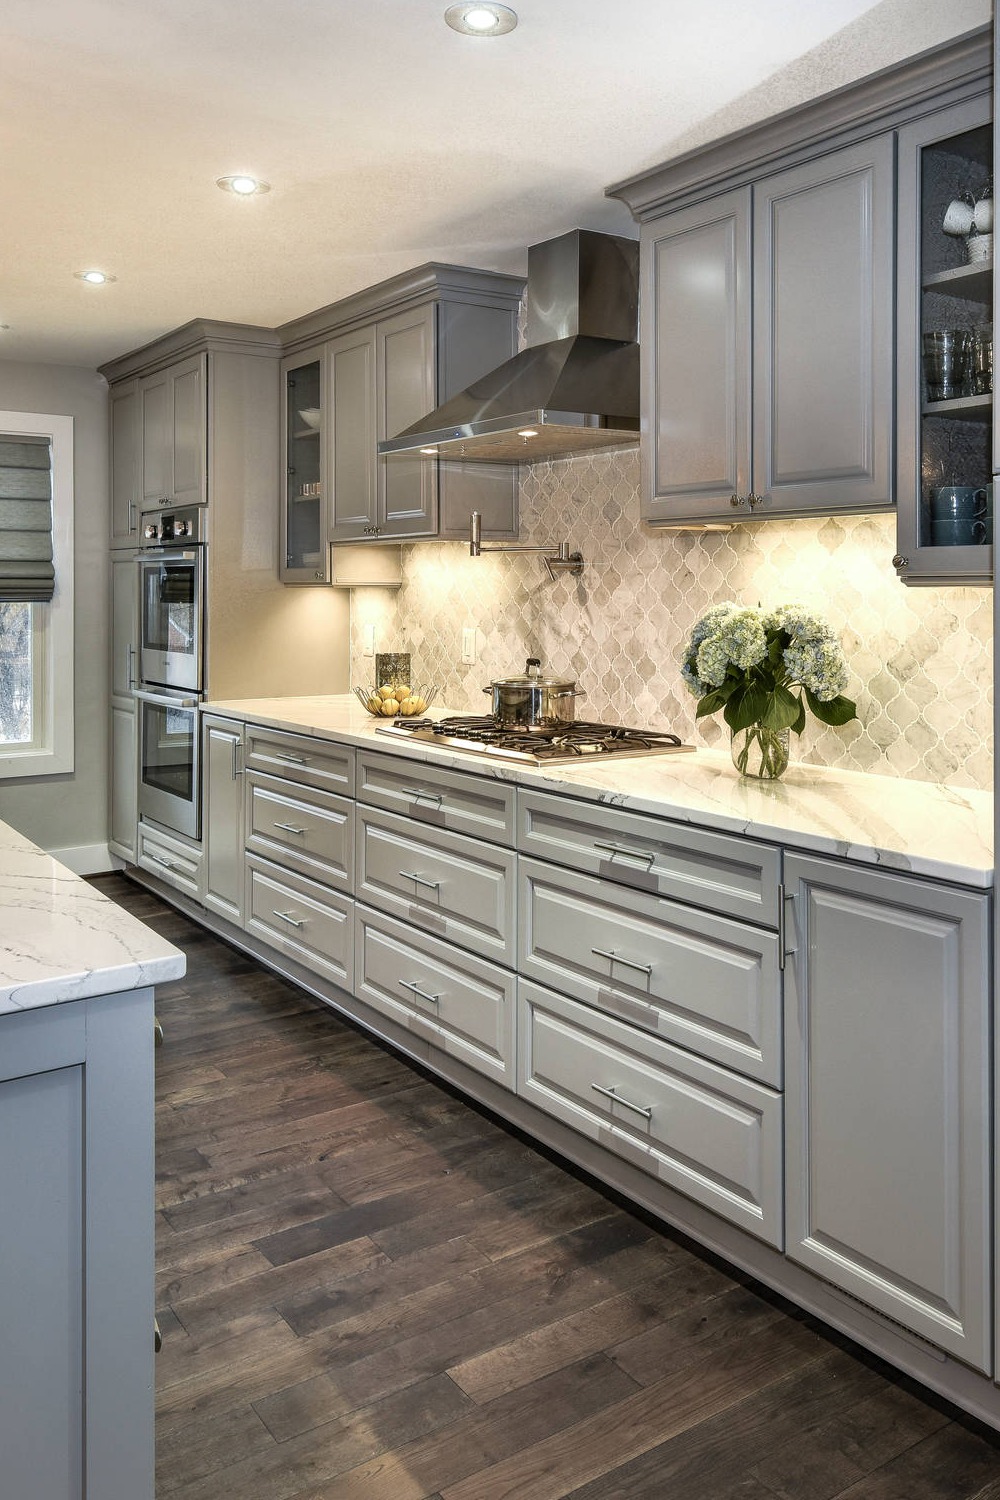 Transitional Kitchen Layout Recessed Panel Gray Island Cabinet Gray Colors White Backsplash Stainless Steel Appliances